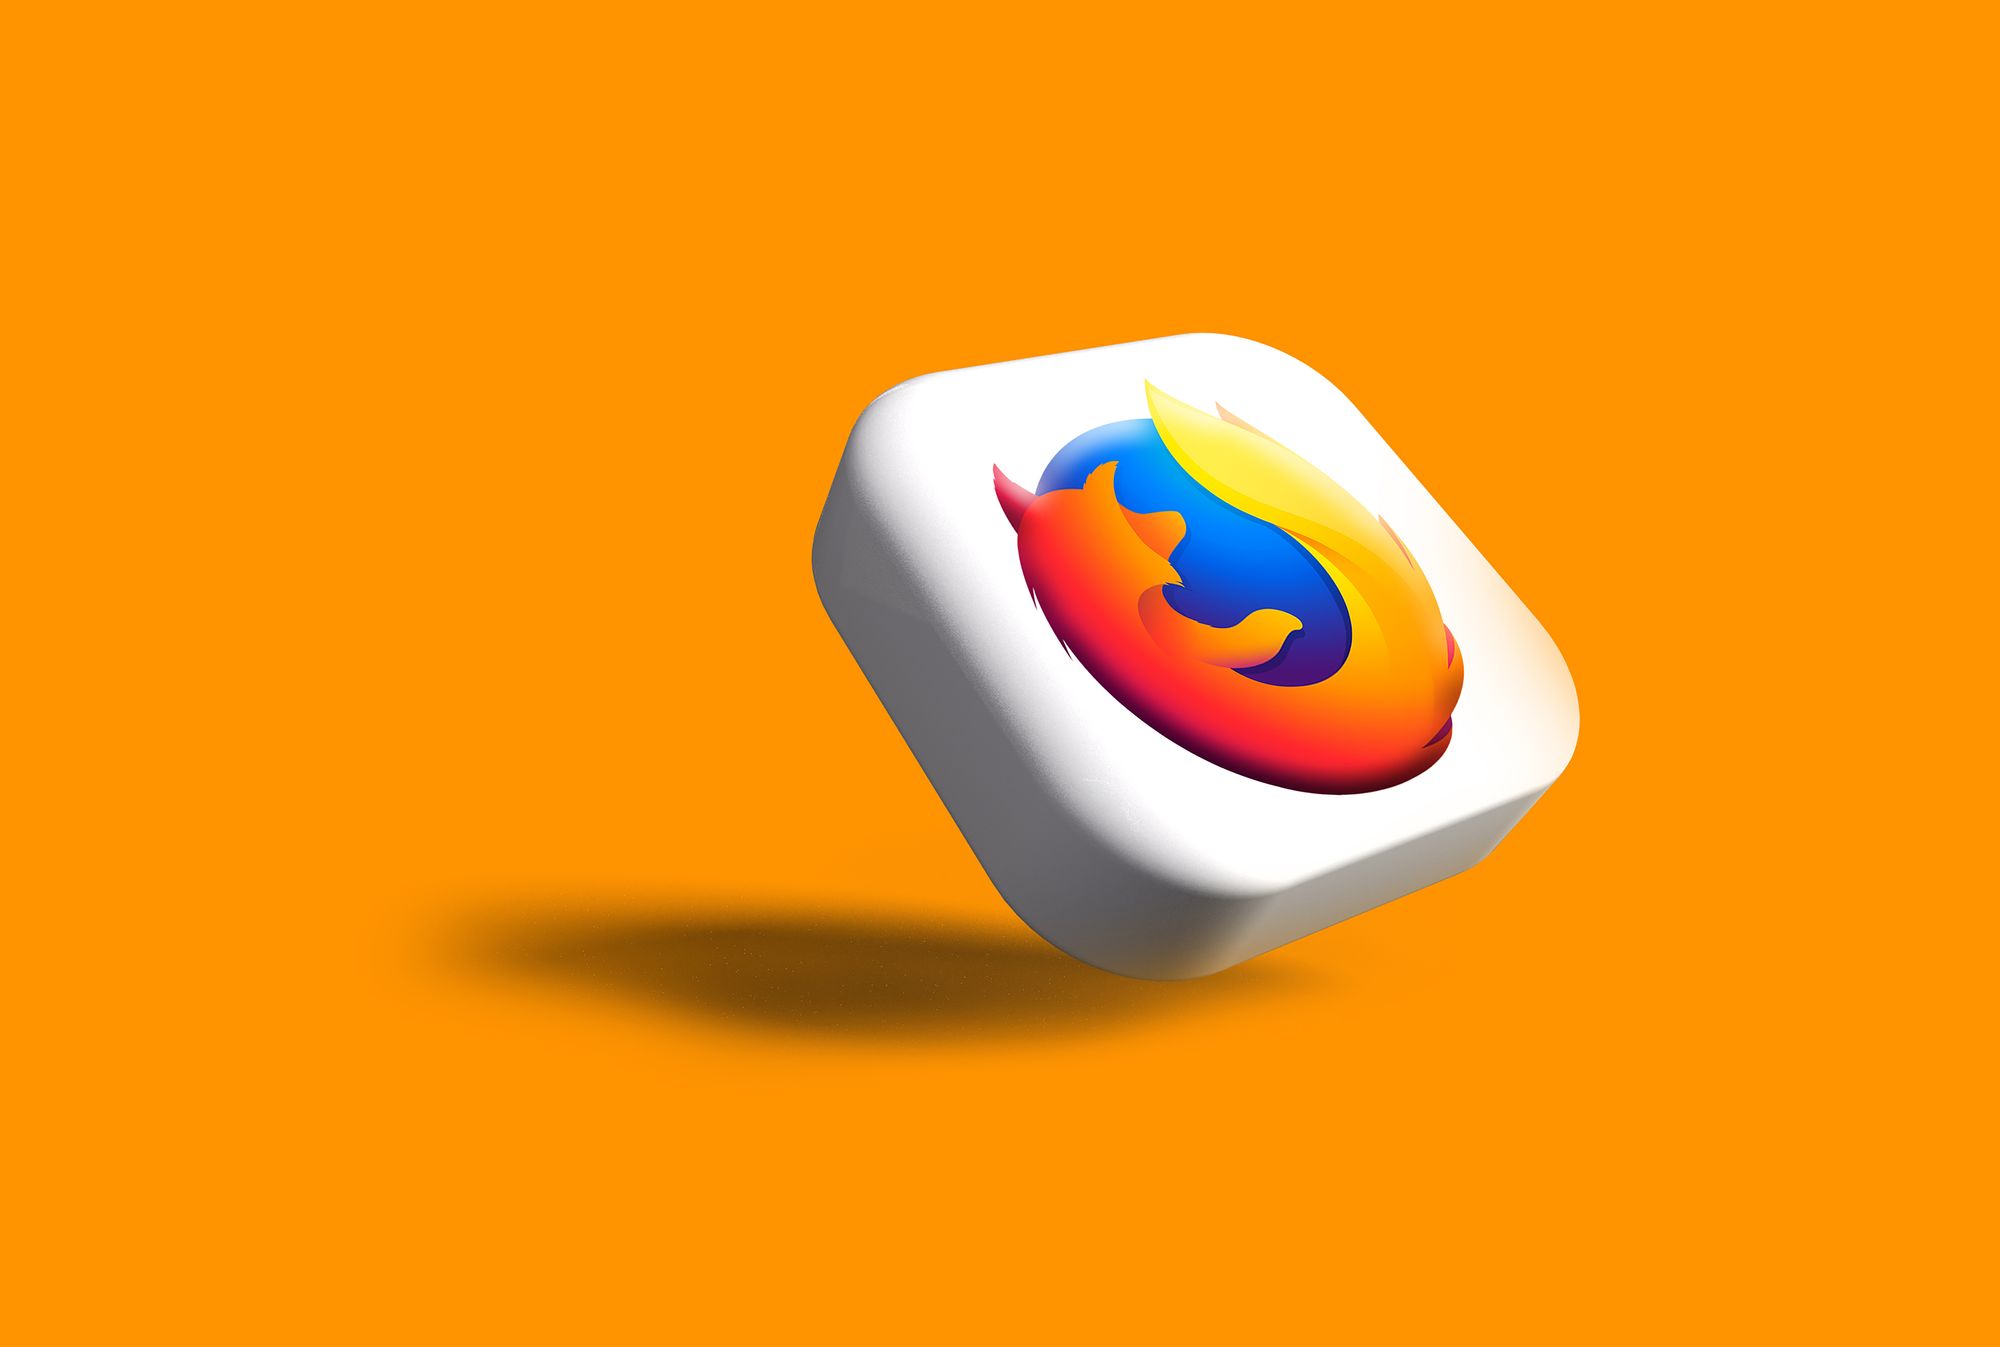 Floating button with the Firefox logo on it.